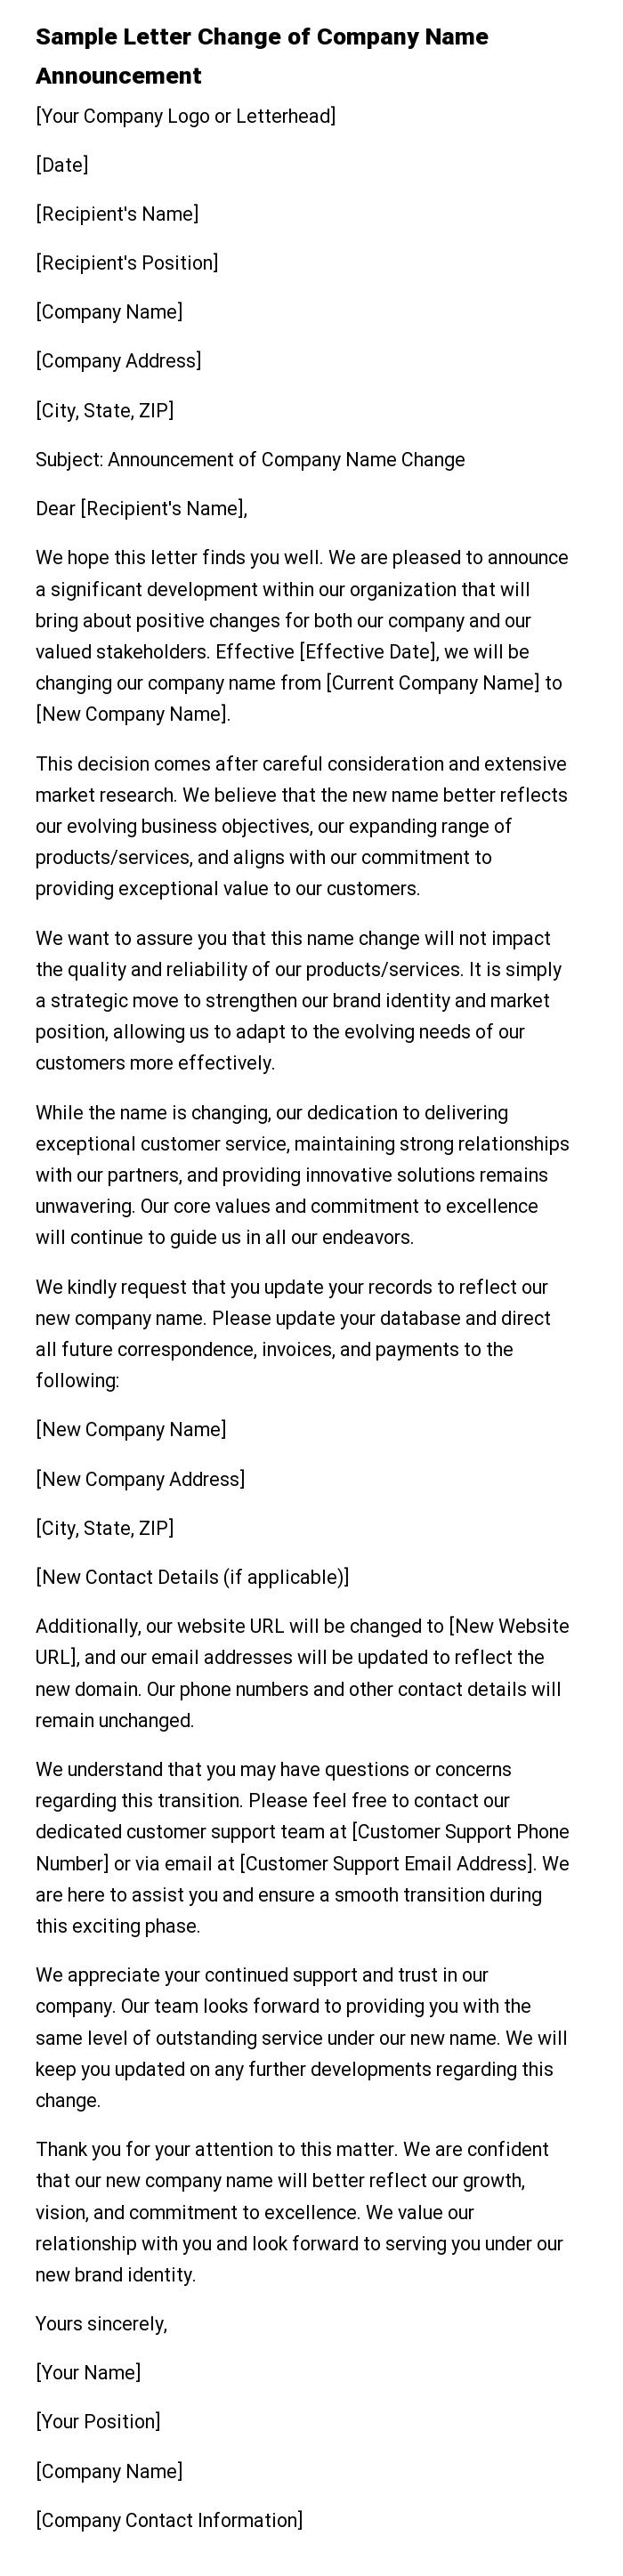 Sample Letter Change of Company Name Announcement